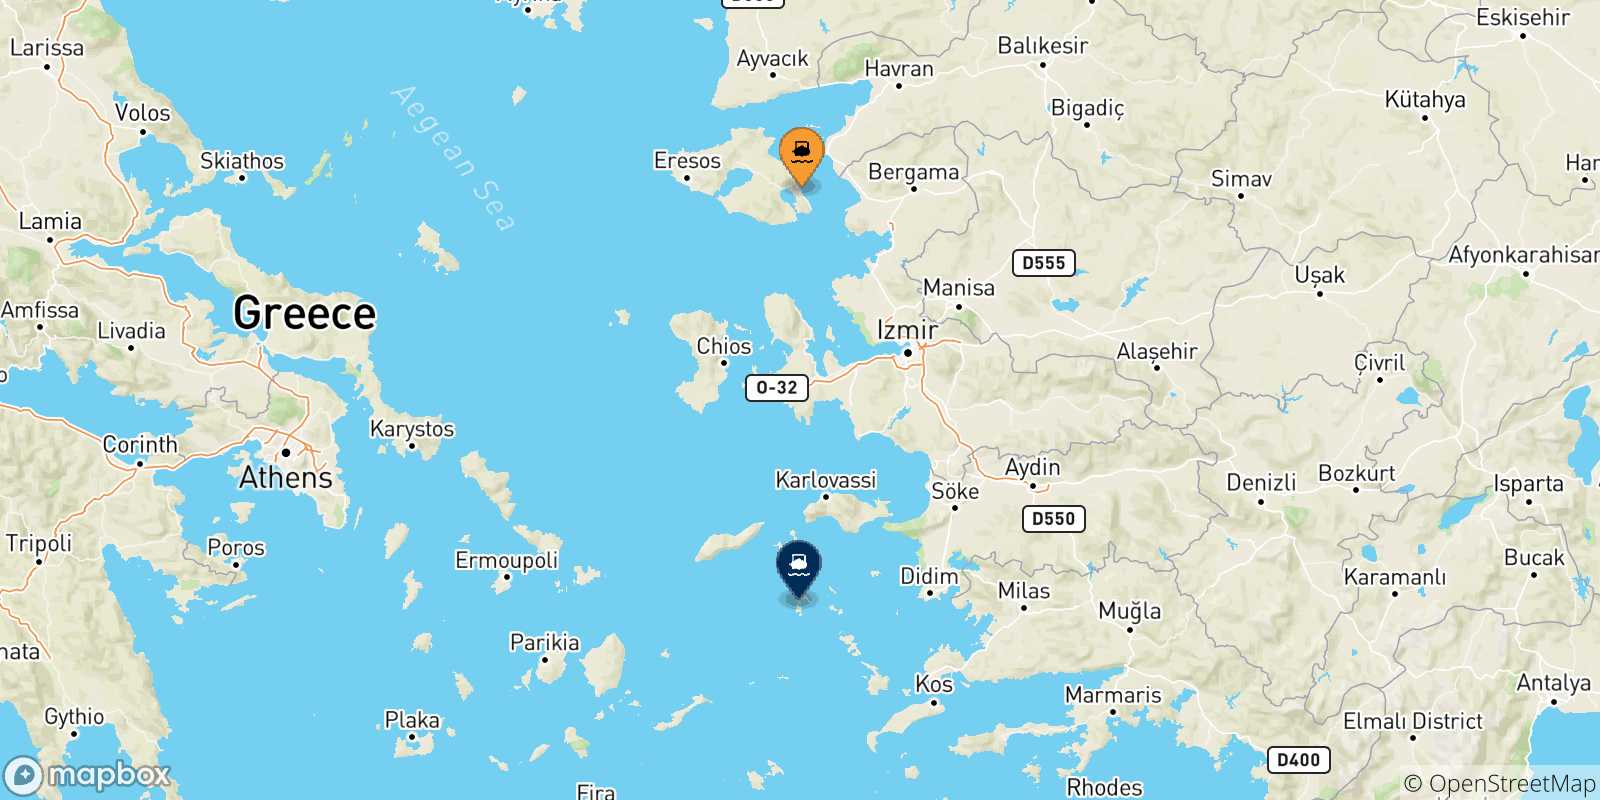 Map of the possible routes between Mytilene (Lesvos) and Dodecanese Islands